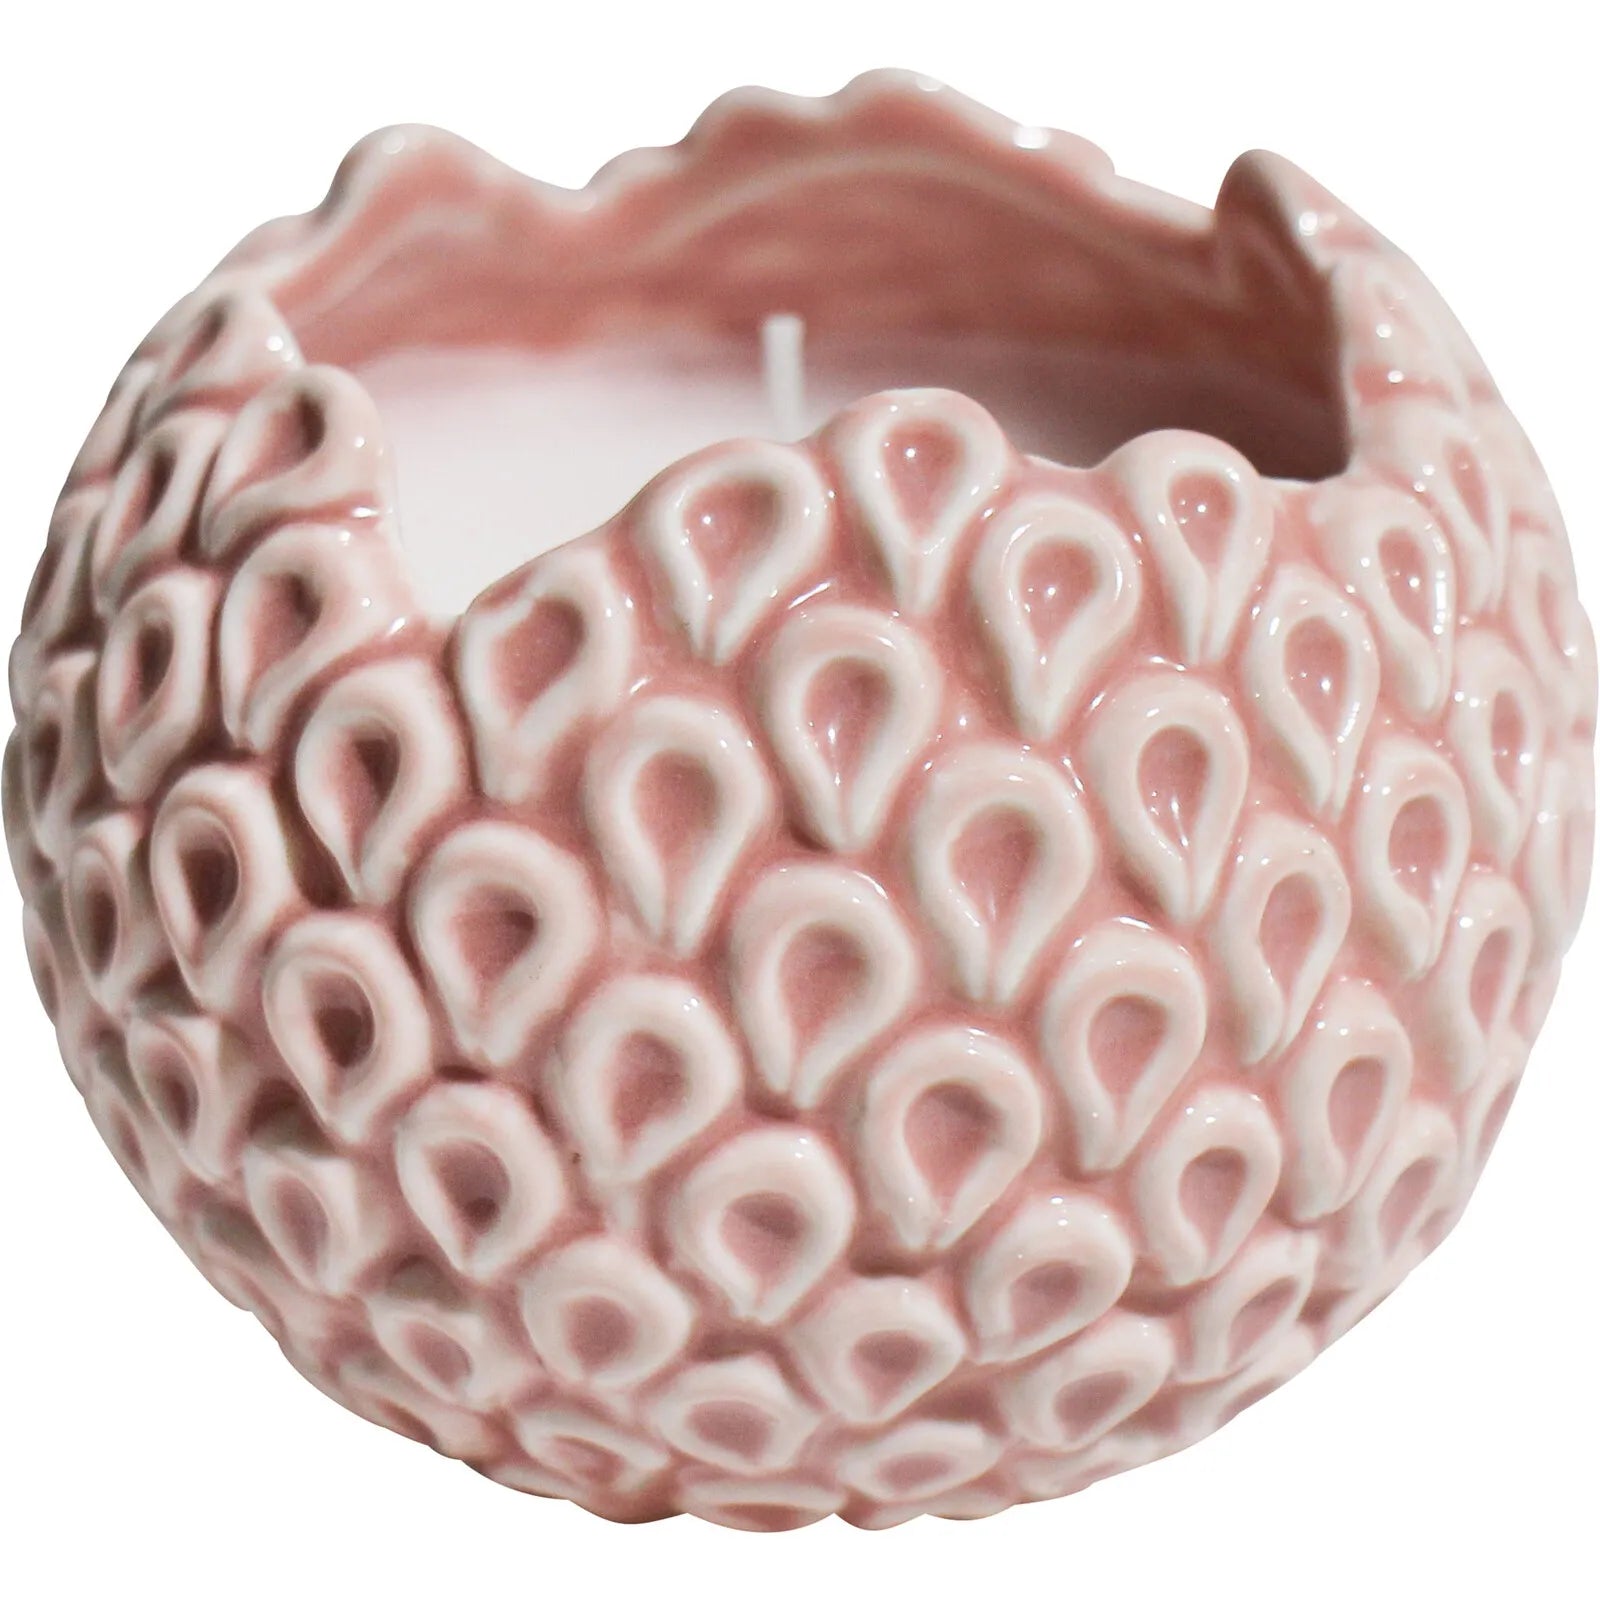 Barnacle Candle - Seafoam or Rose